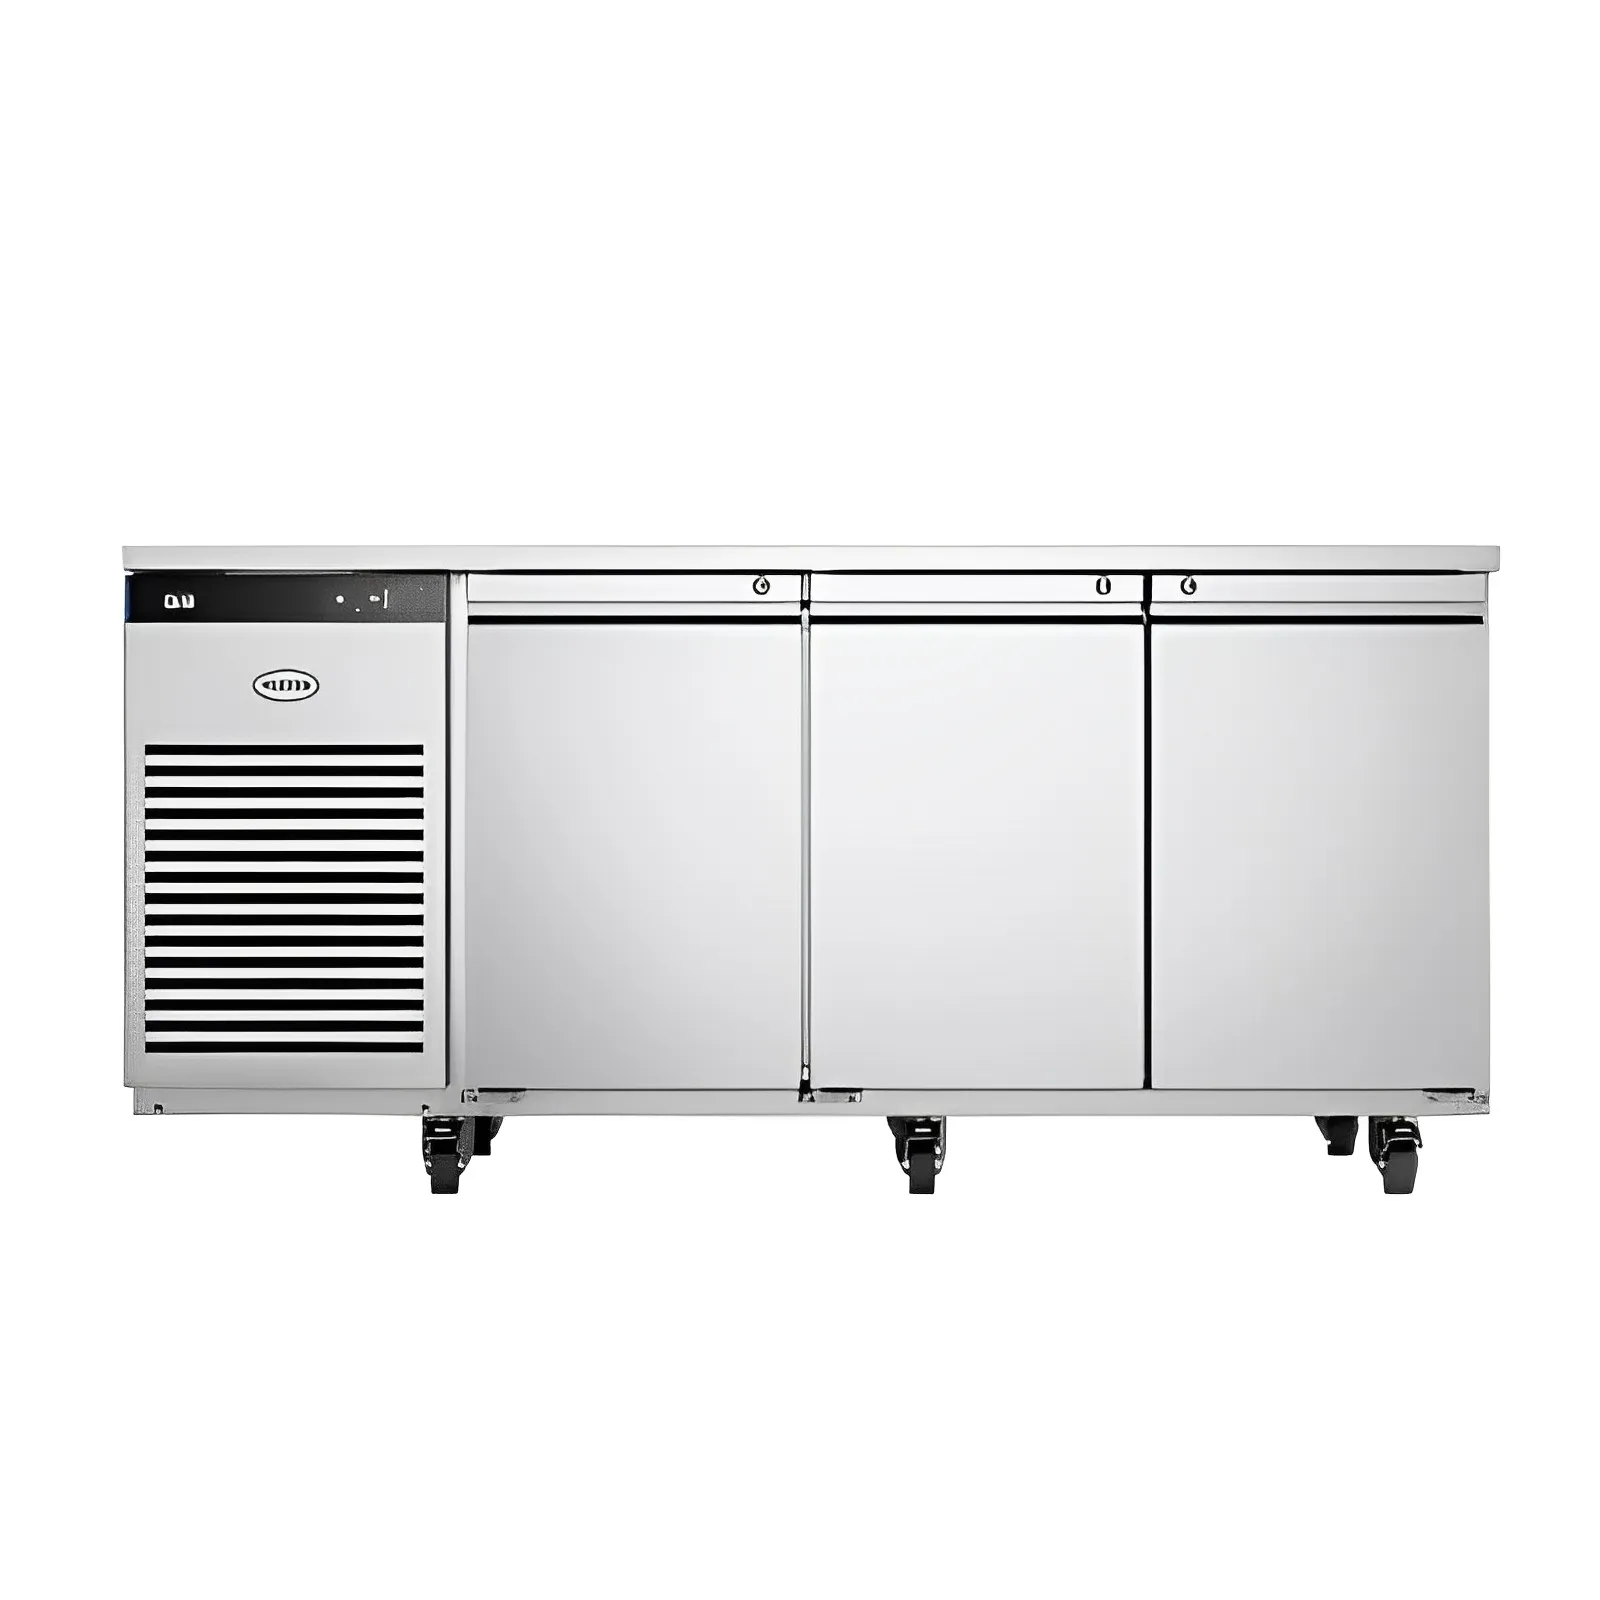 Foster EP1/3M/43-184 EcoPro G3 3 Door Refrigerated Meat Counter, 435 Litres